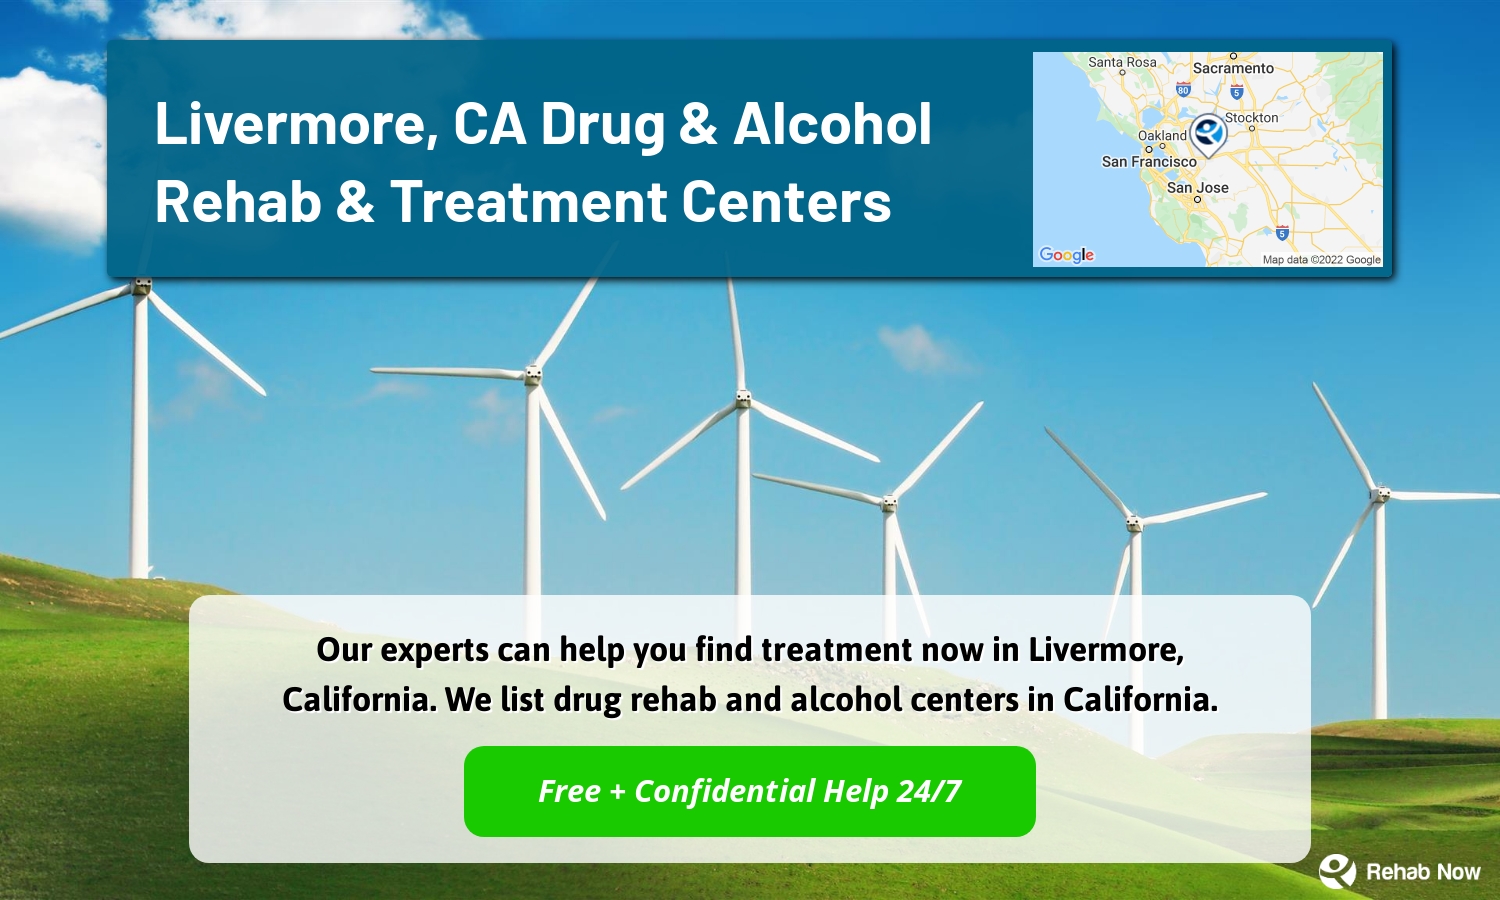 Our experts can help you find treatment now in Livermore, California. We list drug rehab and alcohol centers in California.